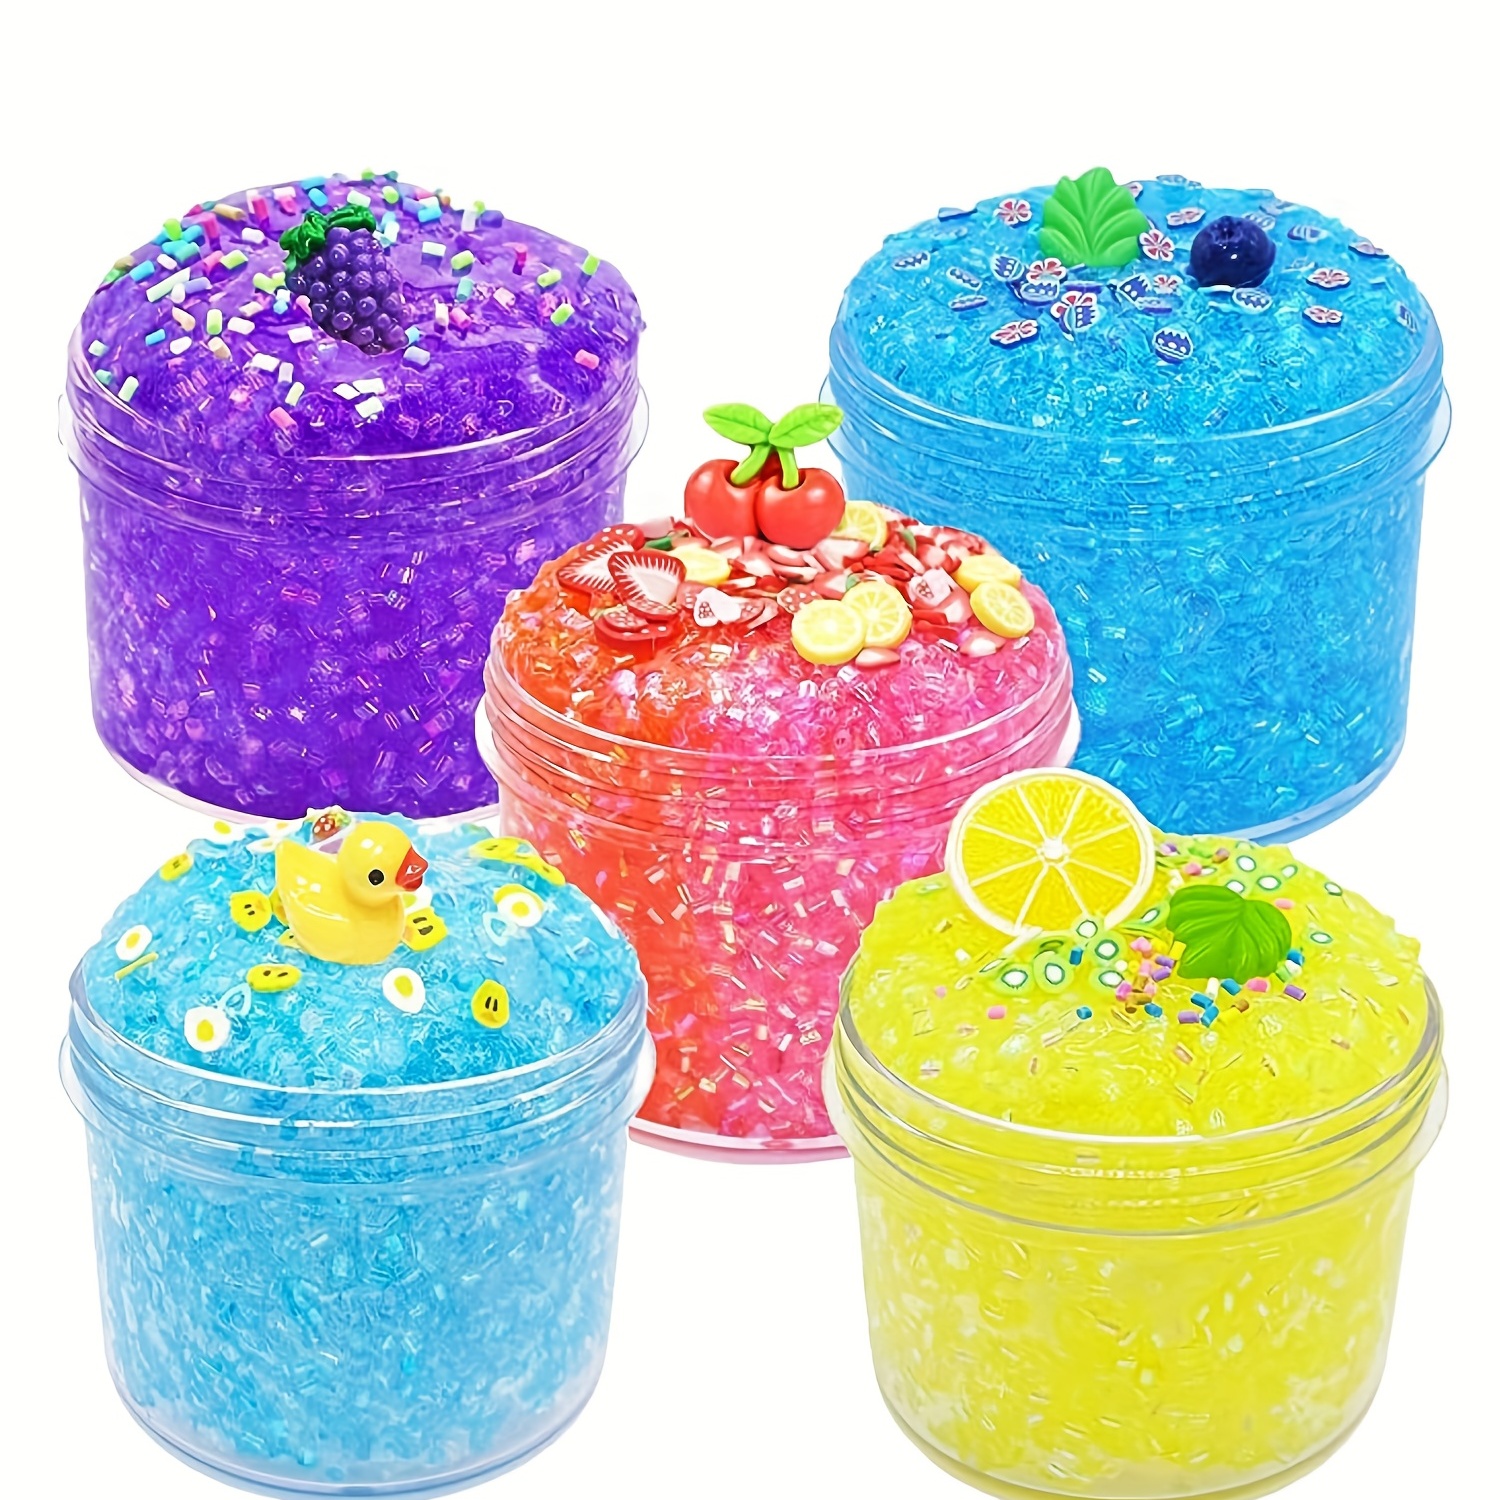 5 Pack Jelly Cube Crunchy Slime， Clear Slime Kit Super Soft and Non-Sticky,  Birthday Gift Slime Party Favors for Girls and Boys